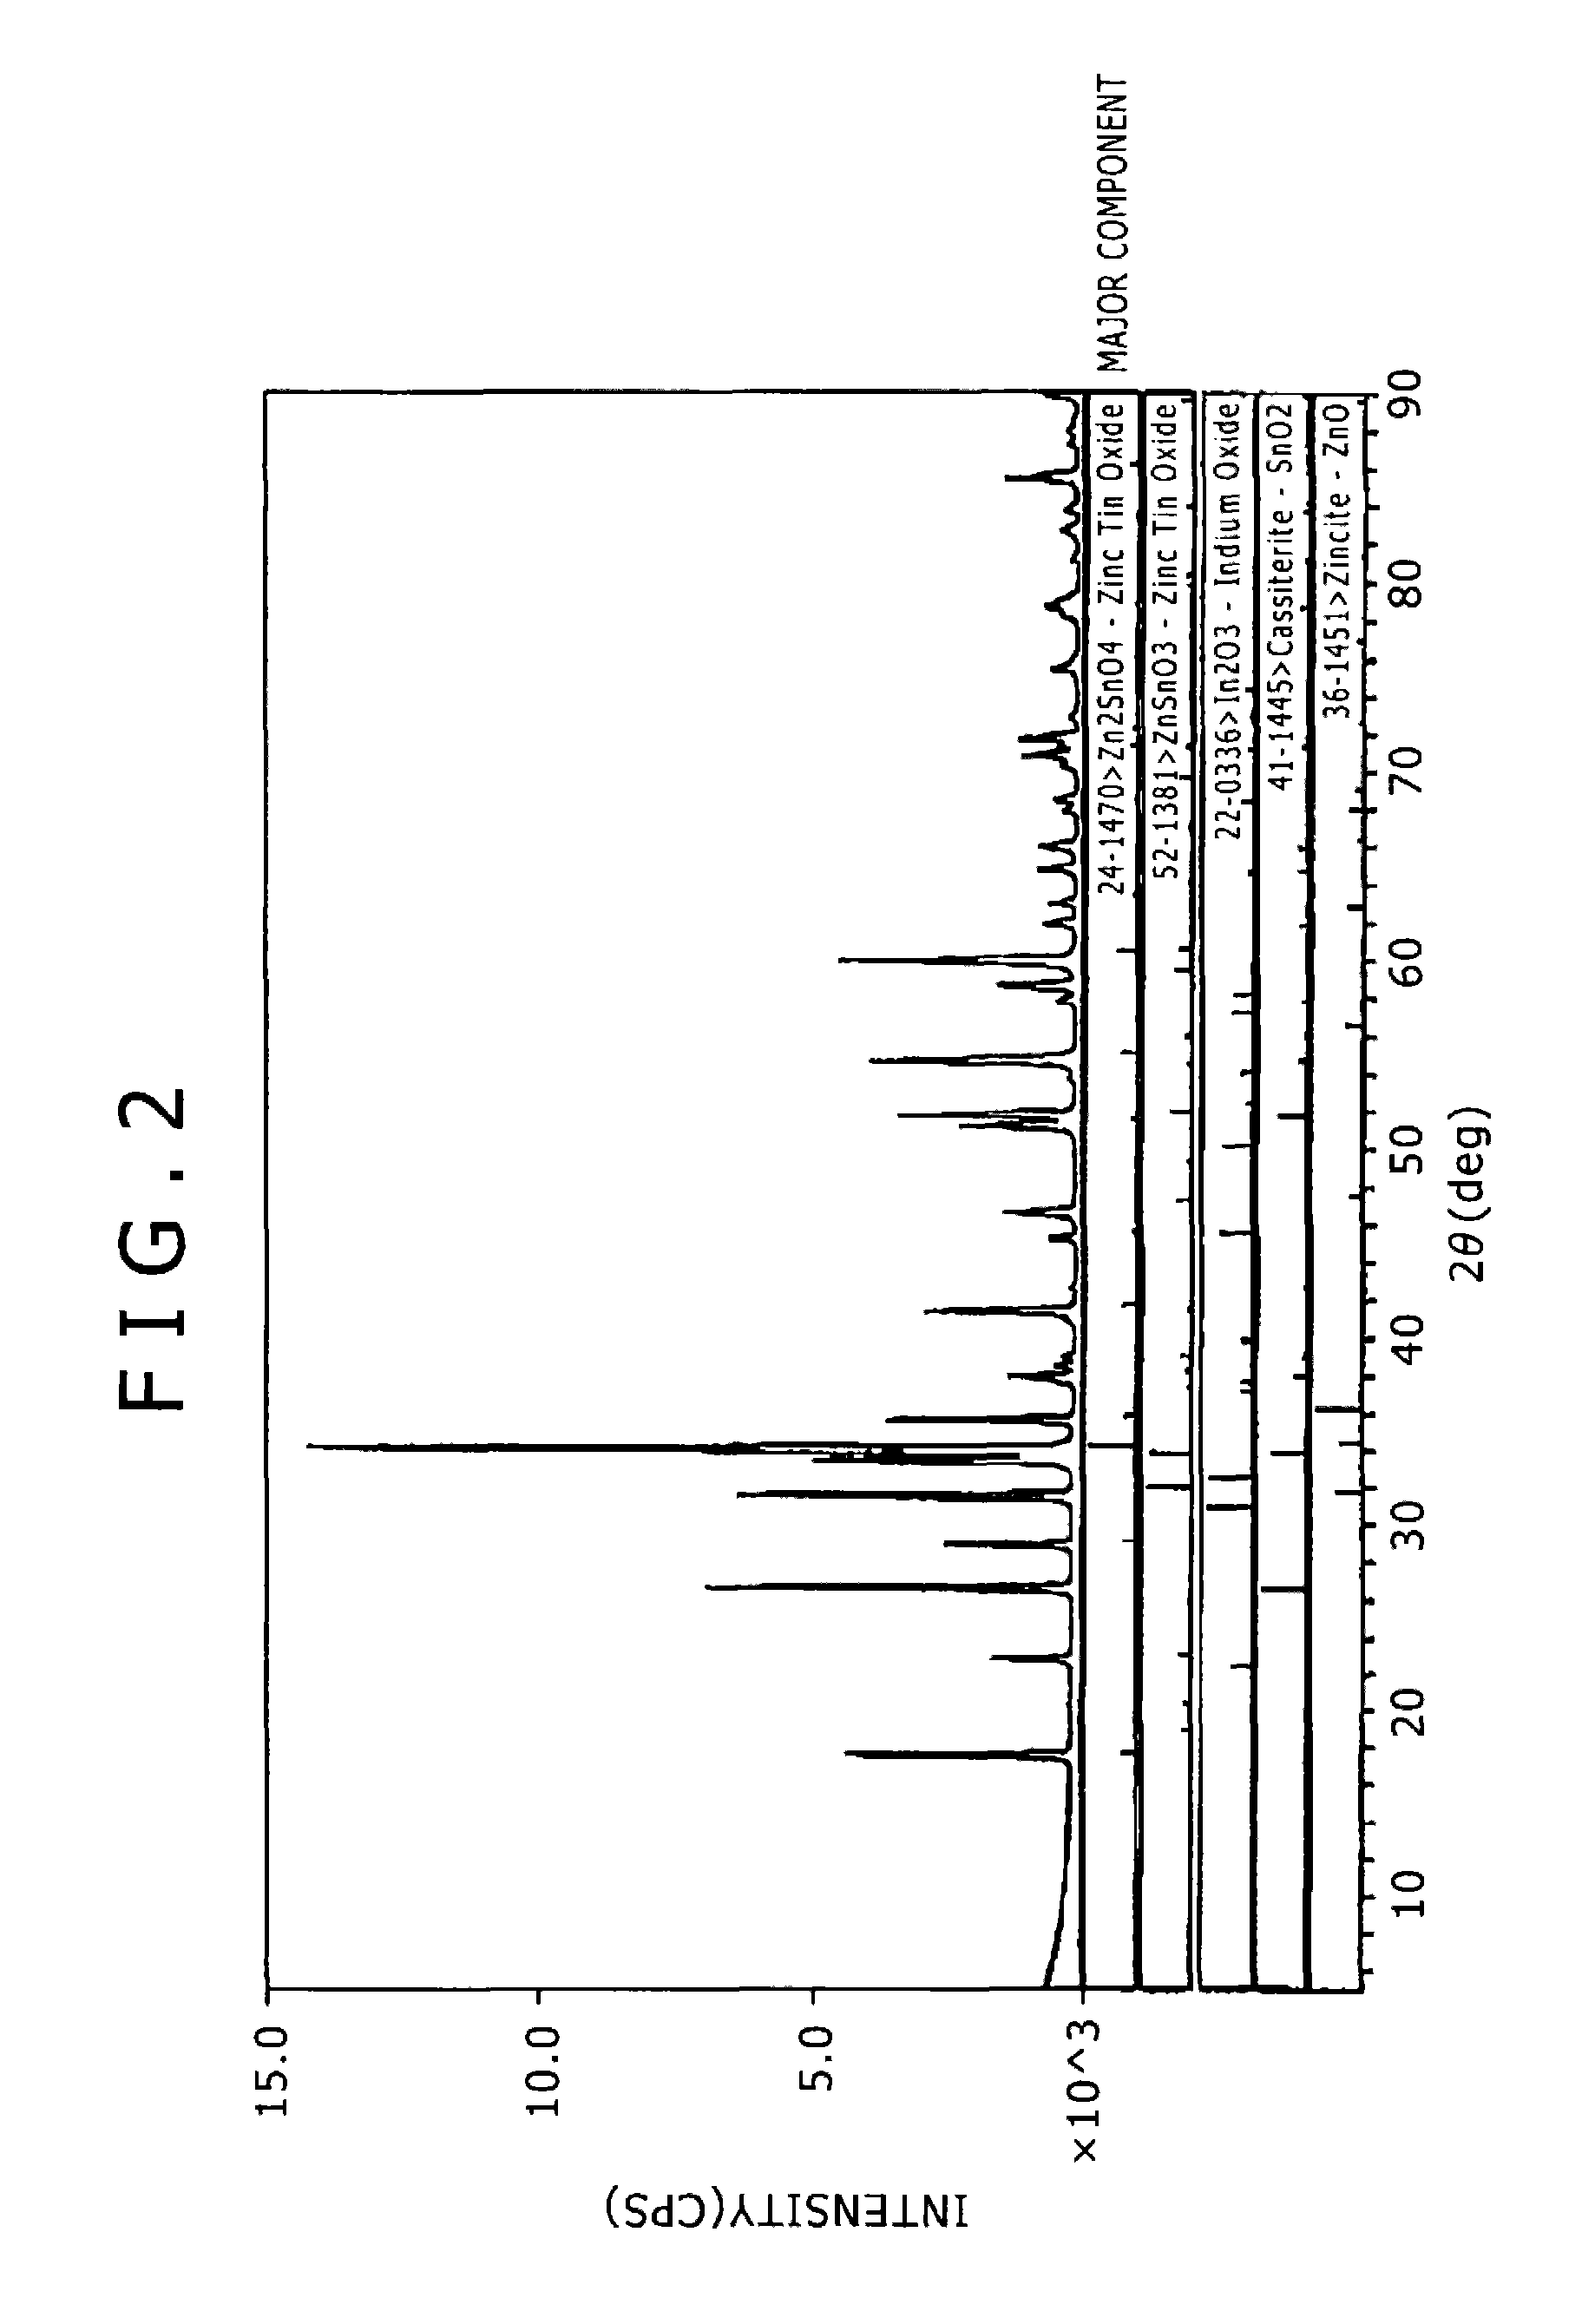 Oxide sintered compact and sputtering target